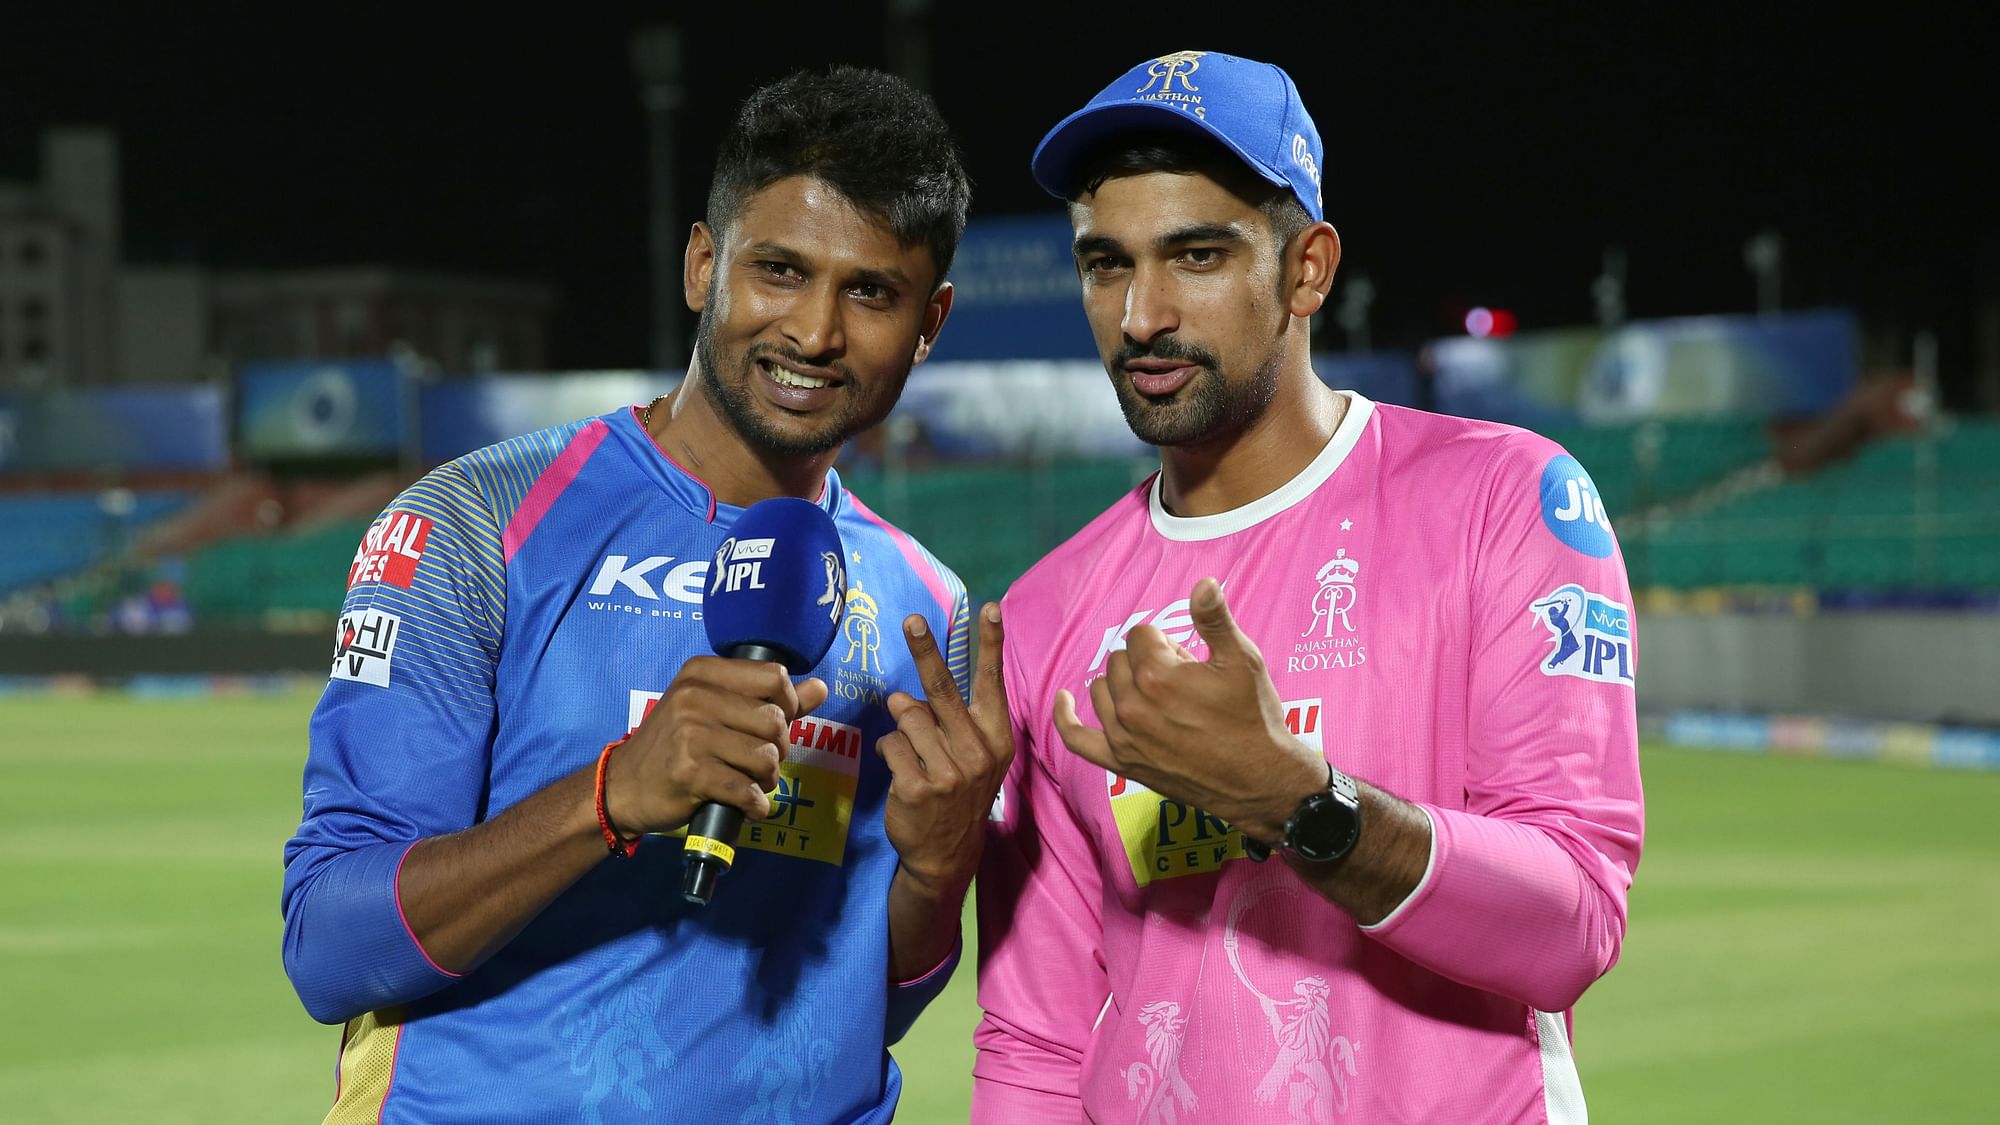 Rajasthan Royals have posted a video with Ish Sodhi rapping lines on his team-mates